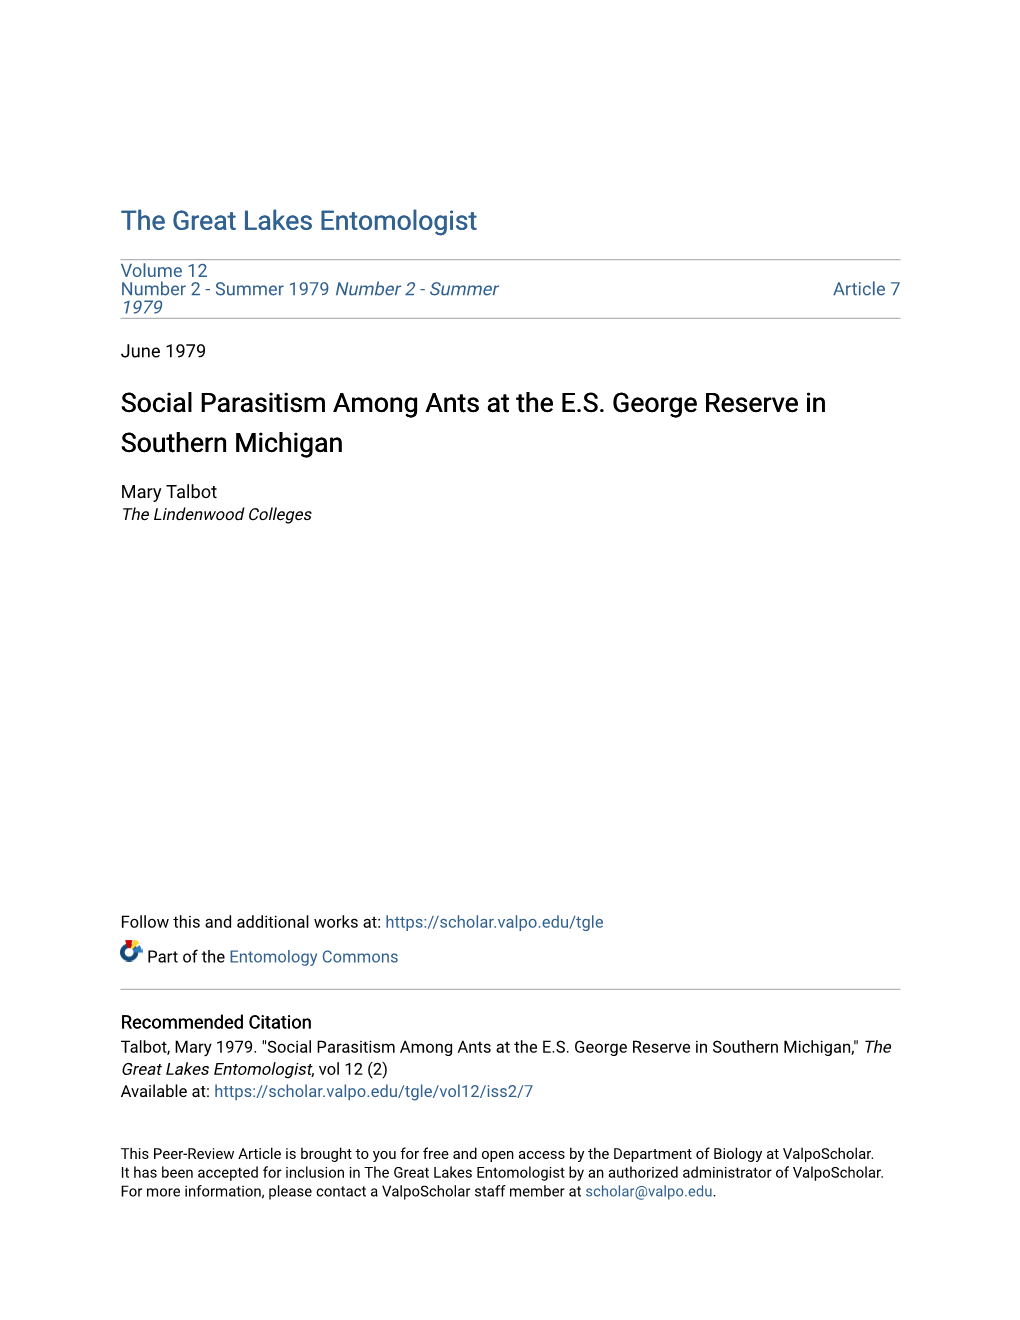 Social Parasitism Among Ants at the E.S. George Reserve in Southern Michigan